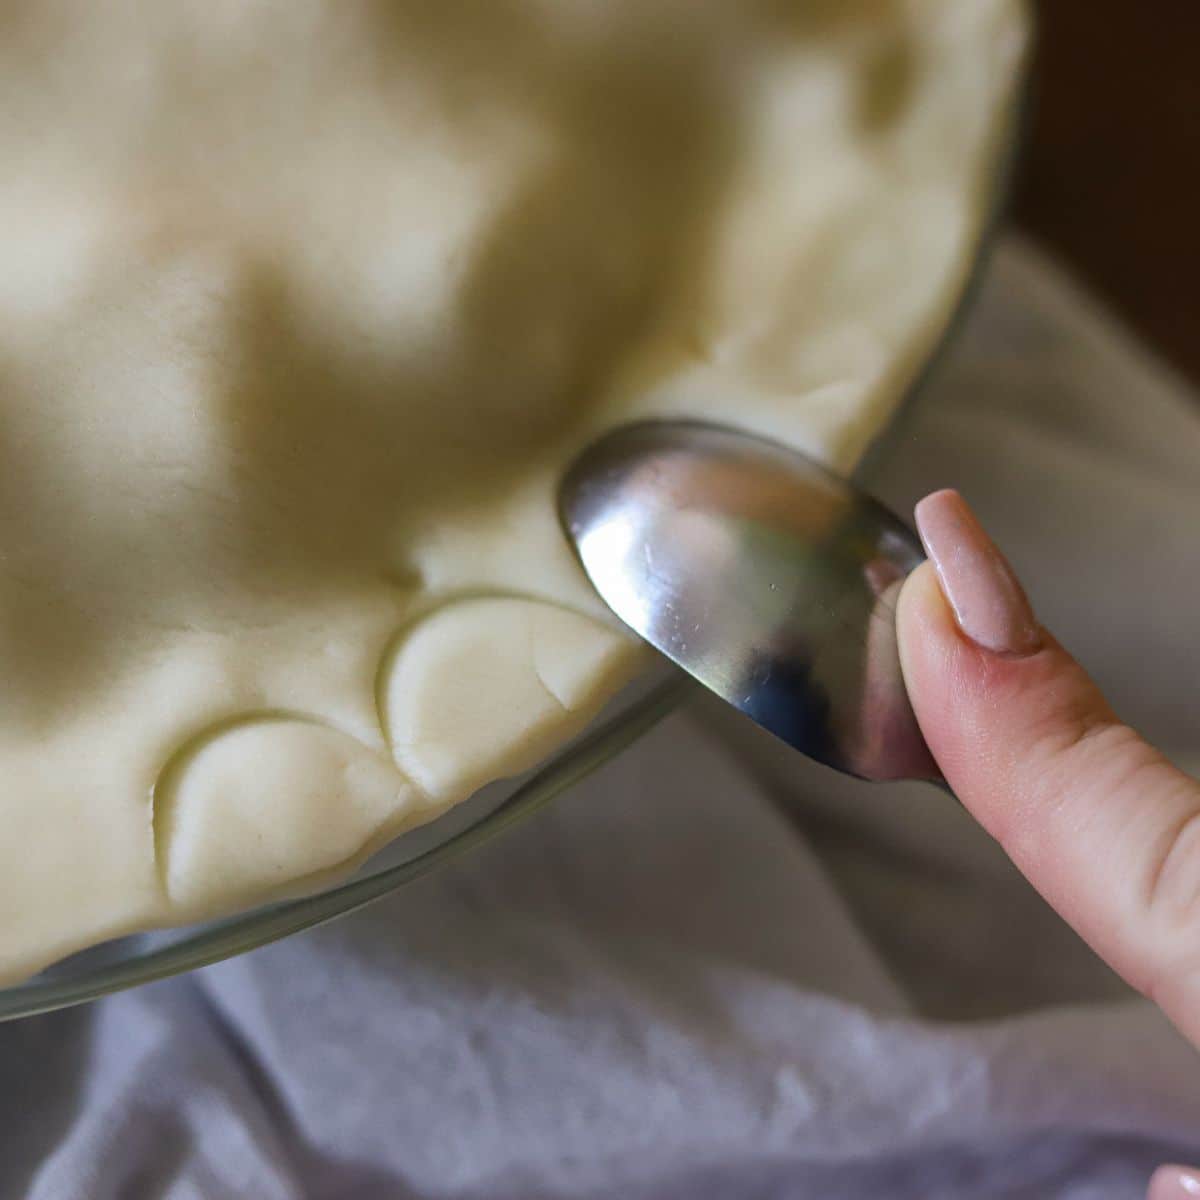 a pie crust being crimped with a spoon